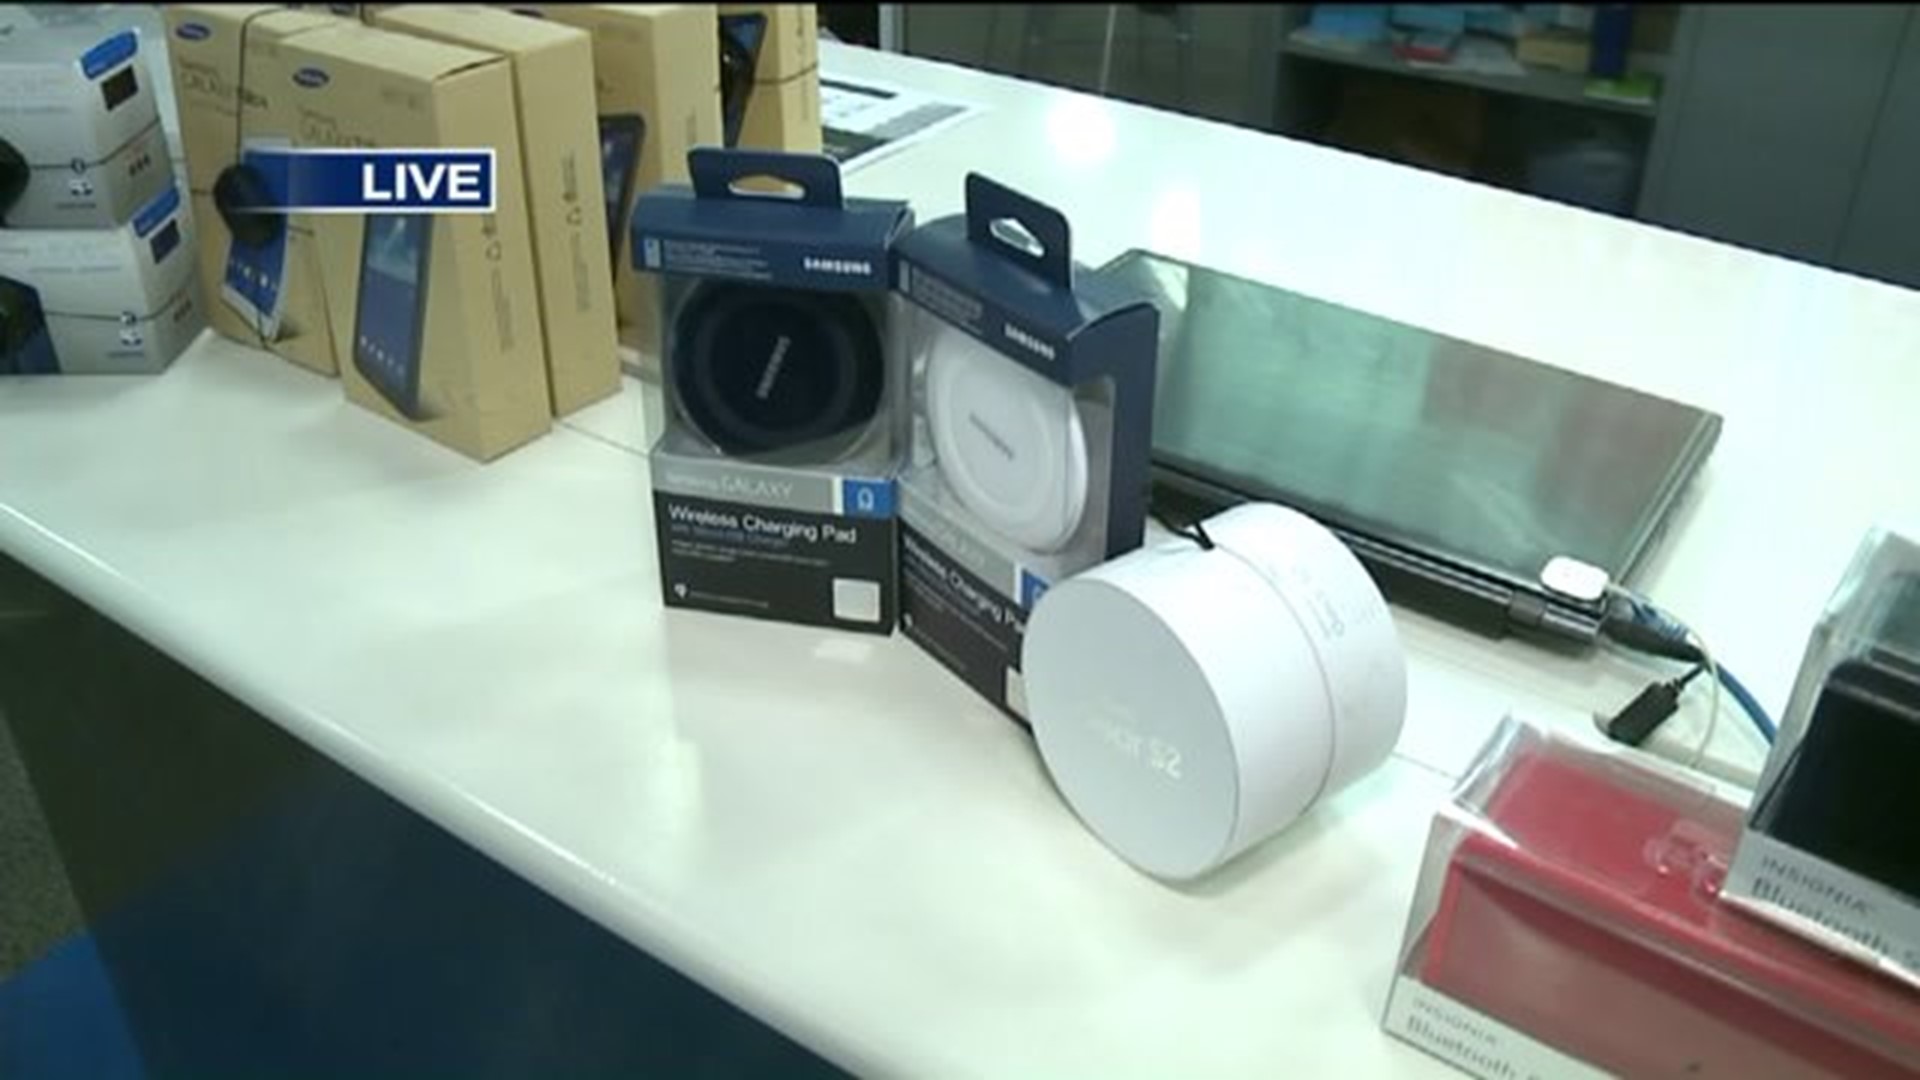 There`s Still Time To Go High Tech: Stocking Stuffers and "Smart Lights"